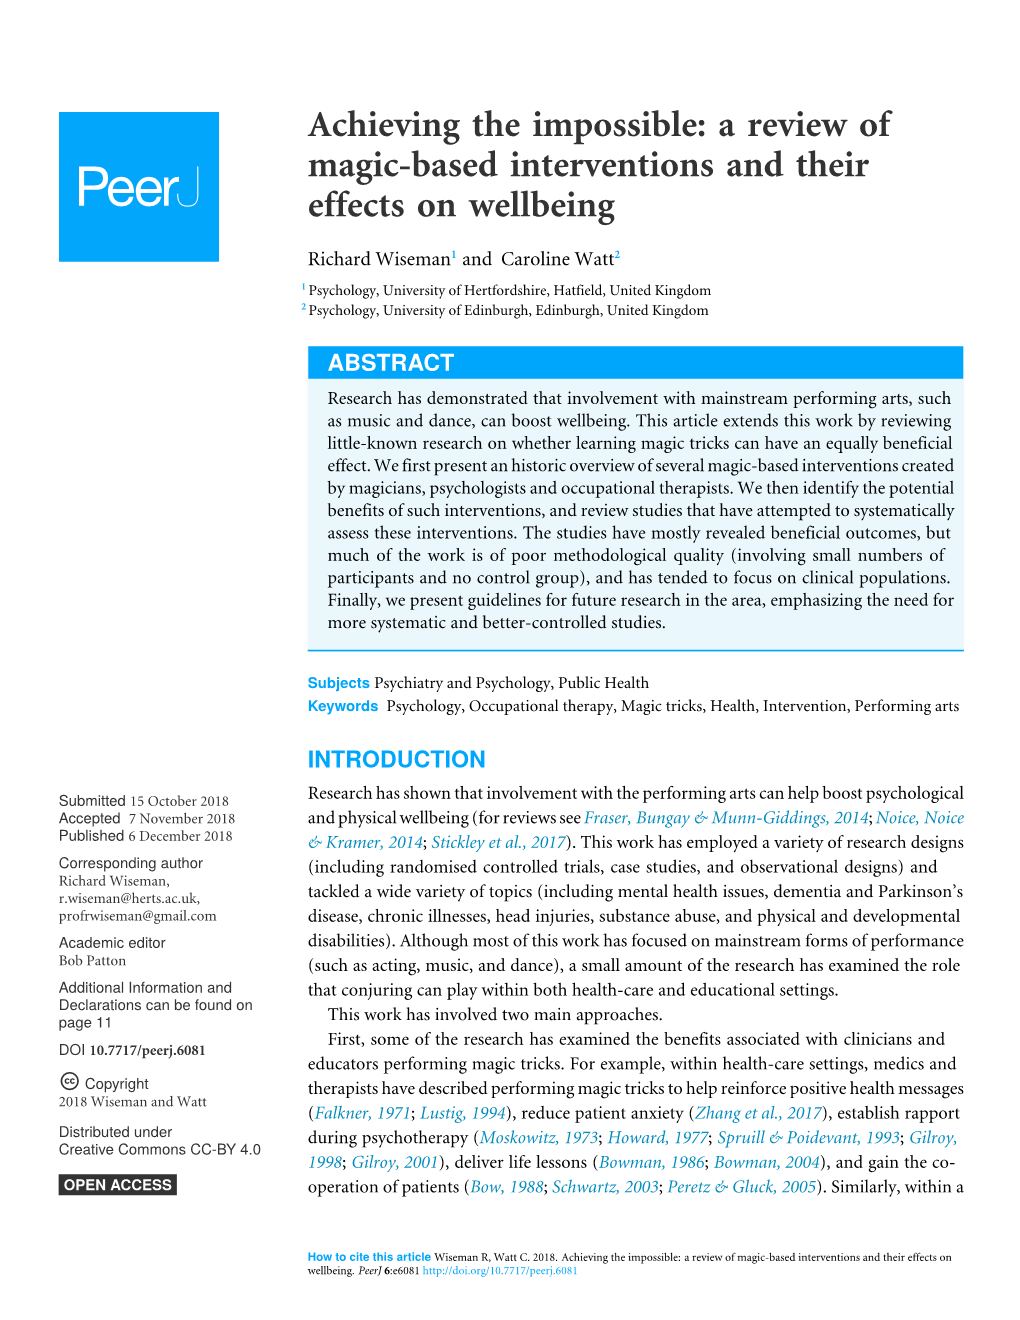 Achieving the Impossible: a Review of Magic-Based Interventions and Their Effects on Wellbeing